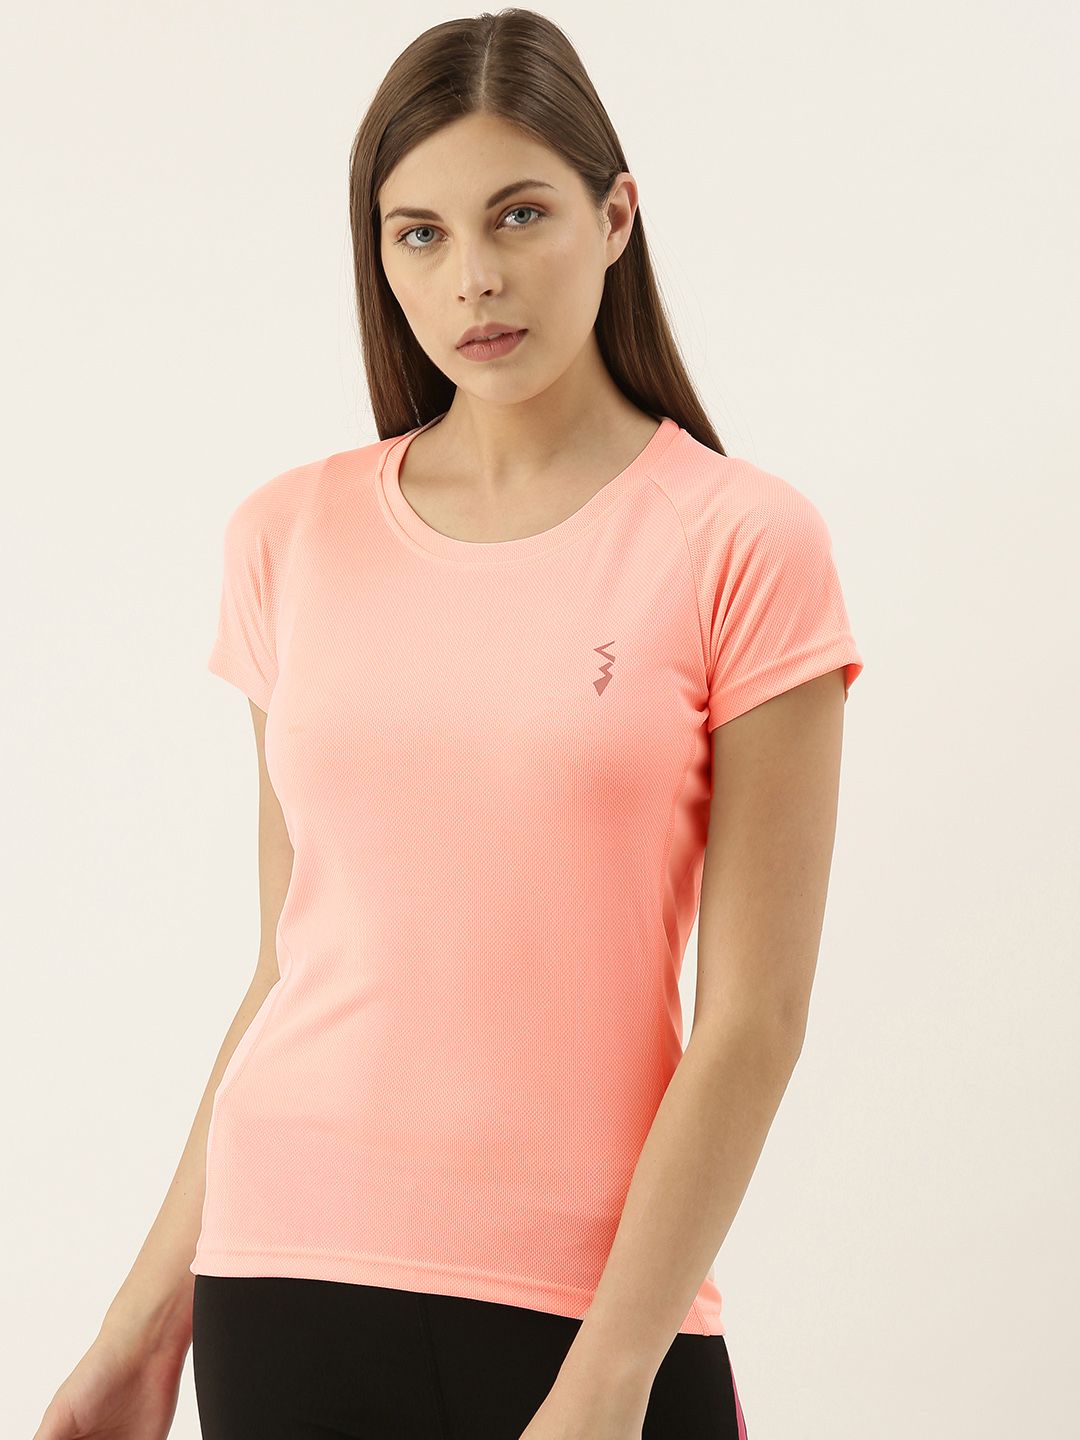 Campus Sutra Women Peach-Coloured Solid Round Neck Running T-shirt Price in India